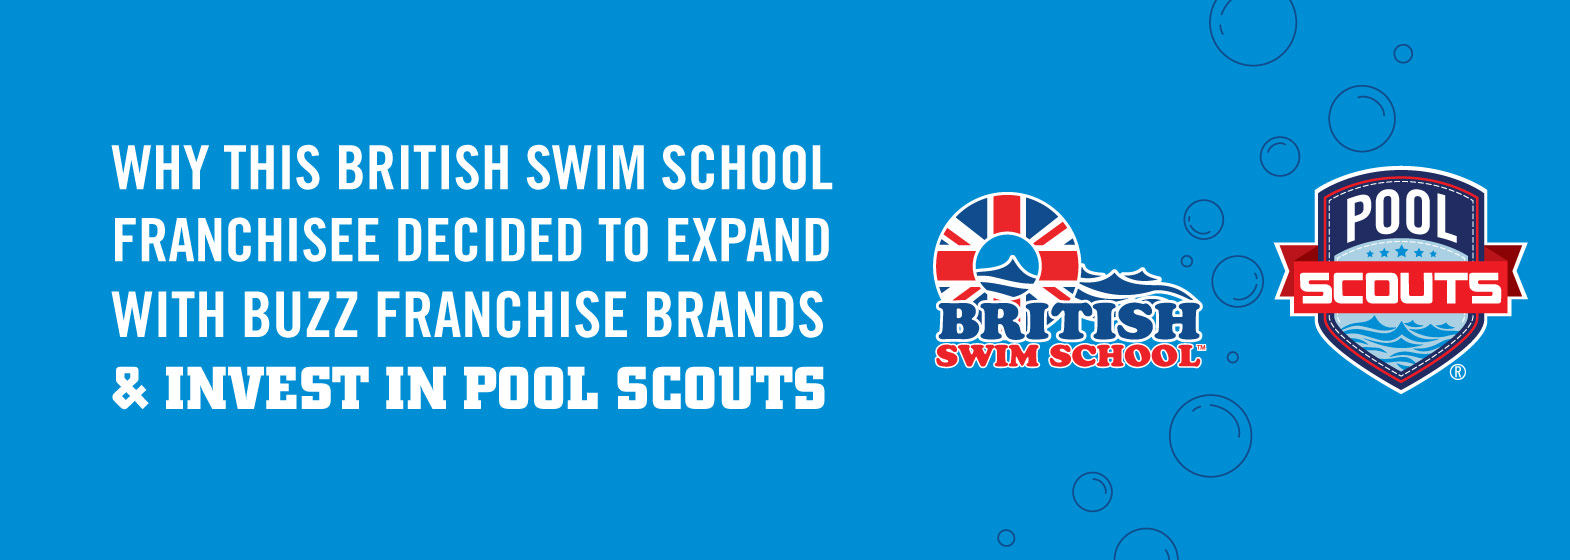 Image of Why This British Swim School Franchisee Decided To Expand With Buzz Franchise Brands and Invest in Pool Scouts